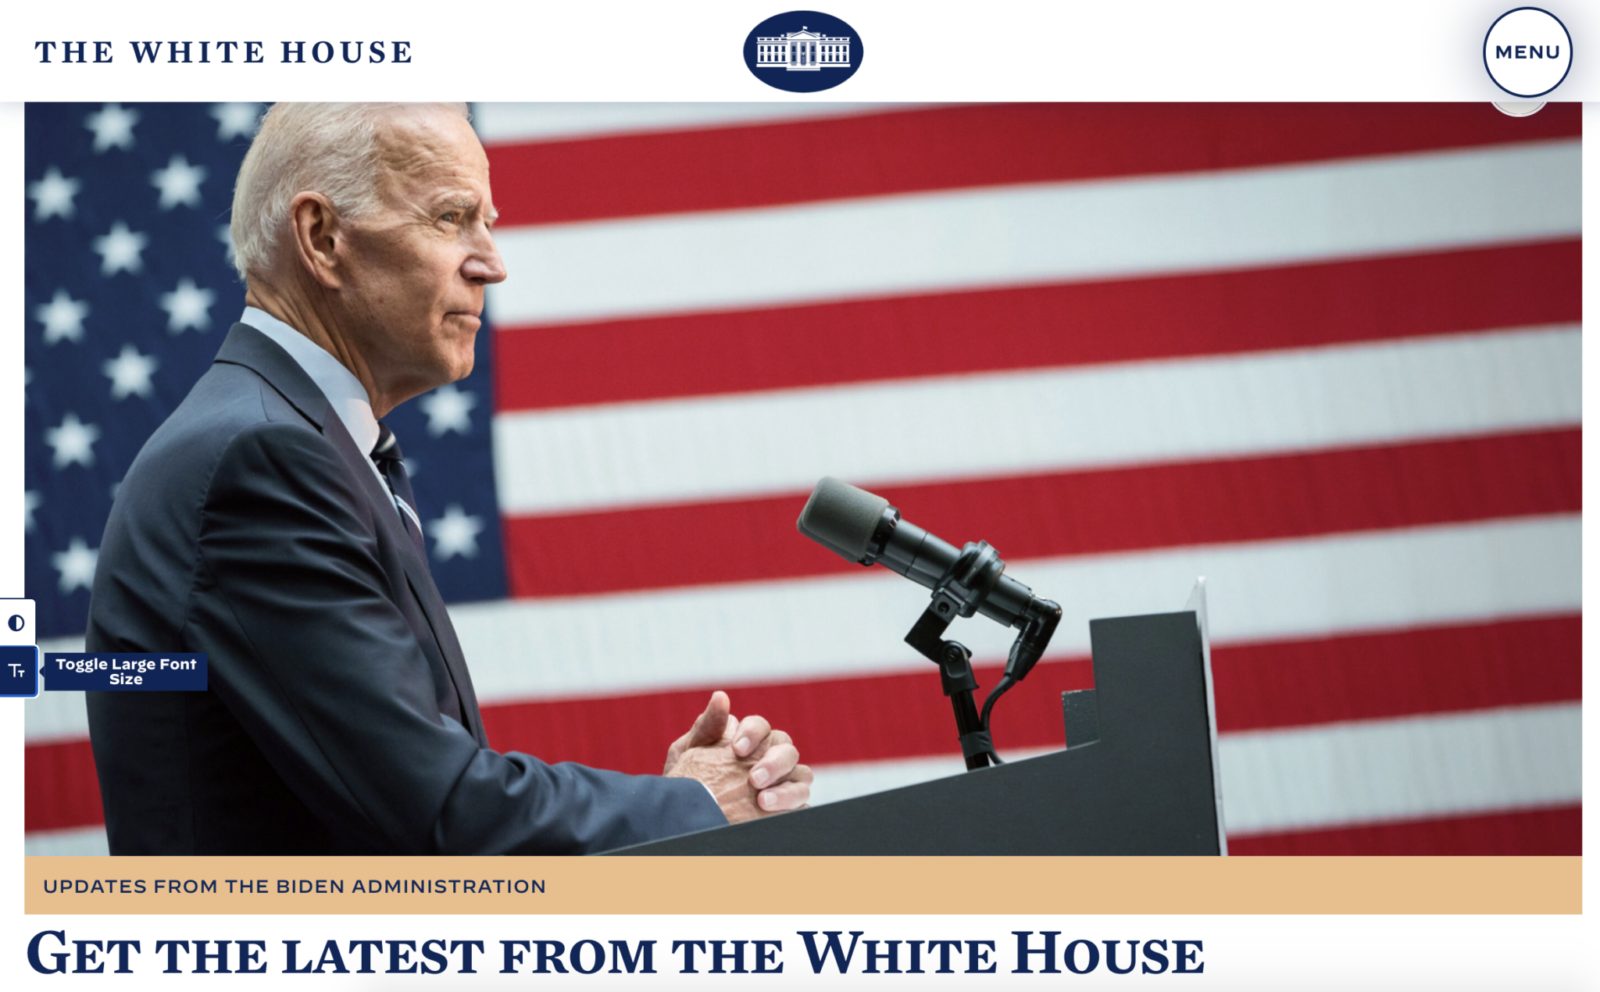 Whitehouse.gov with "toggle large font size" button on